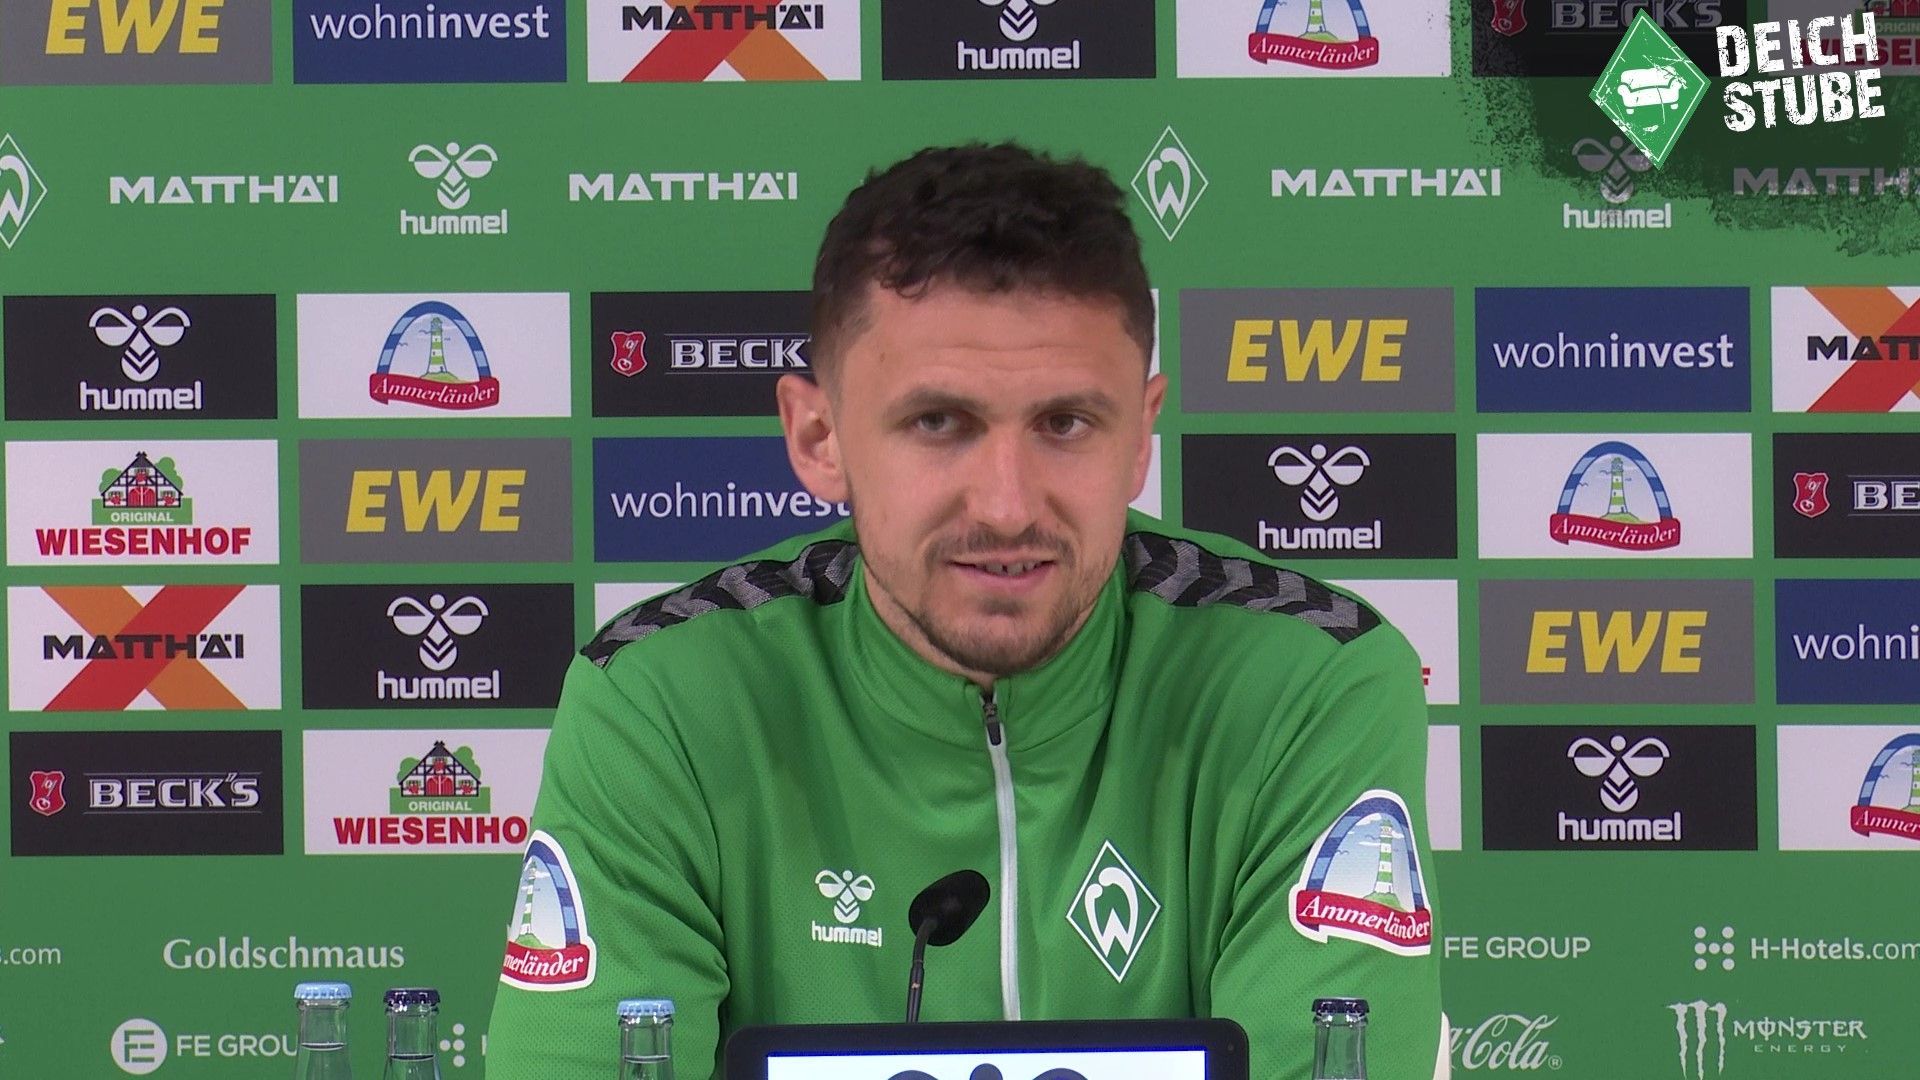 “We'll decide after the European Championship”: Milos Veljkovic on his future at Werder Bremen and European dreams!